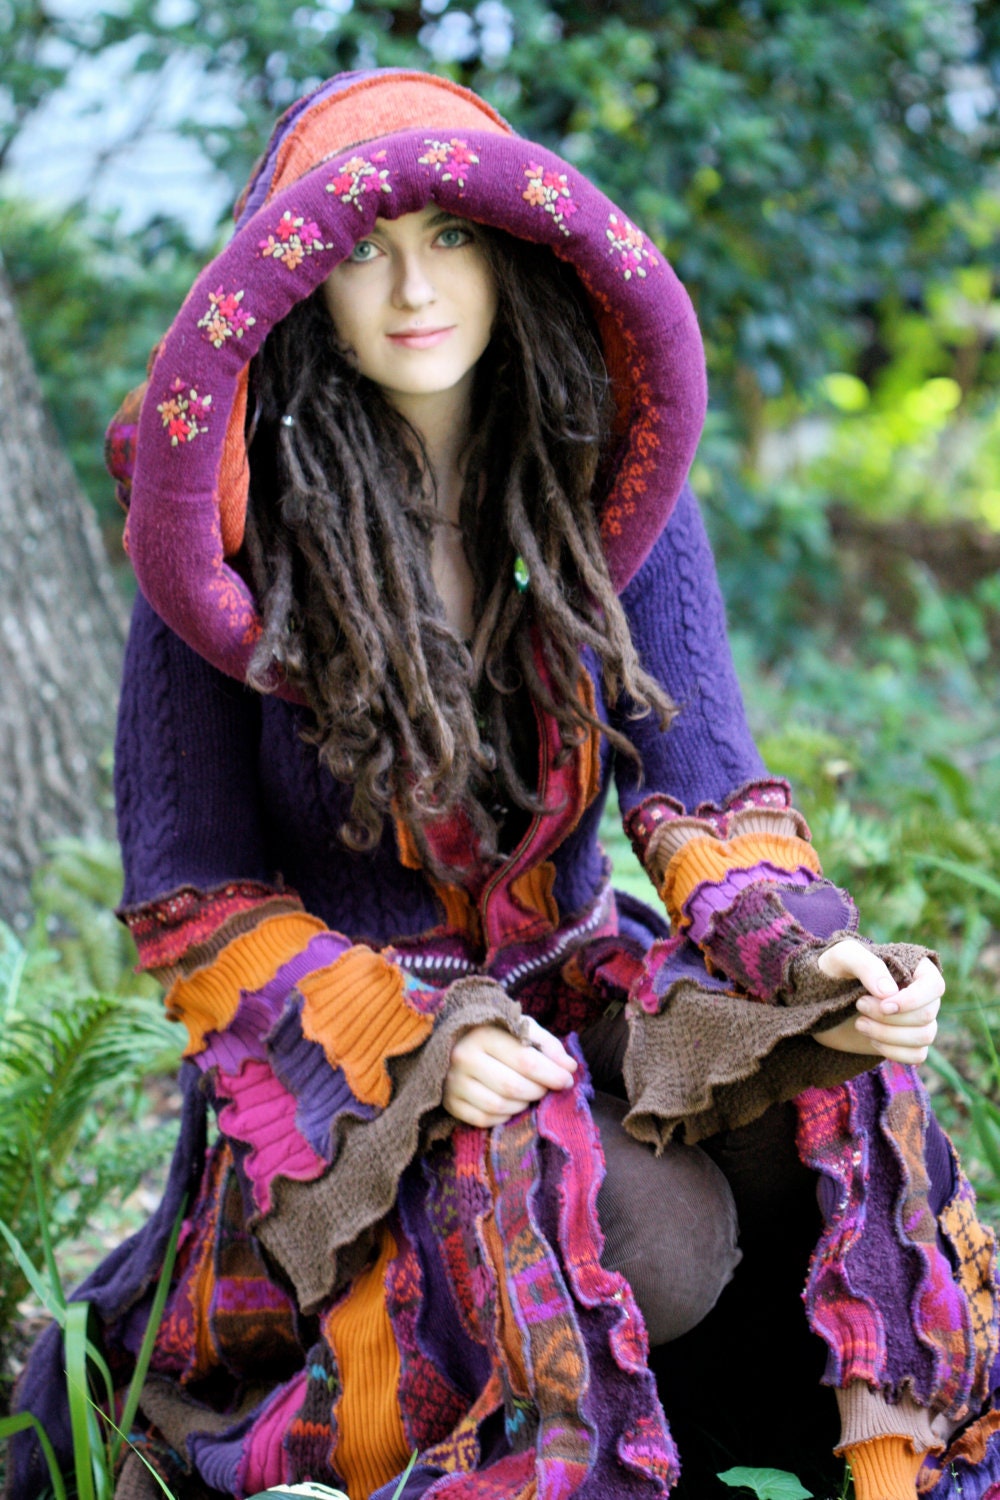 Ready Now Fall  gypsy  faery dream traveling patchwork upcycled recycled sweater coat